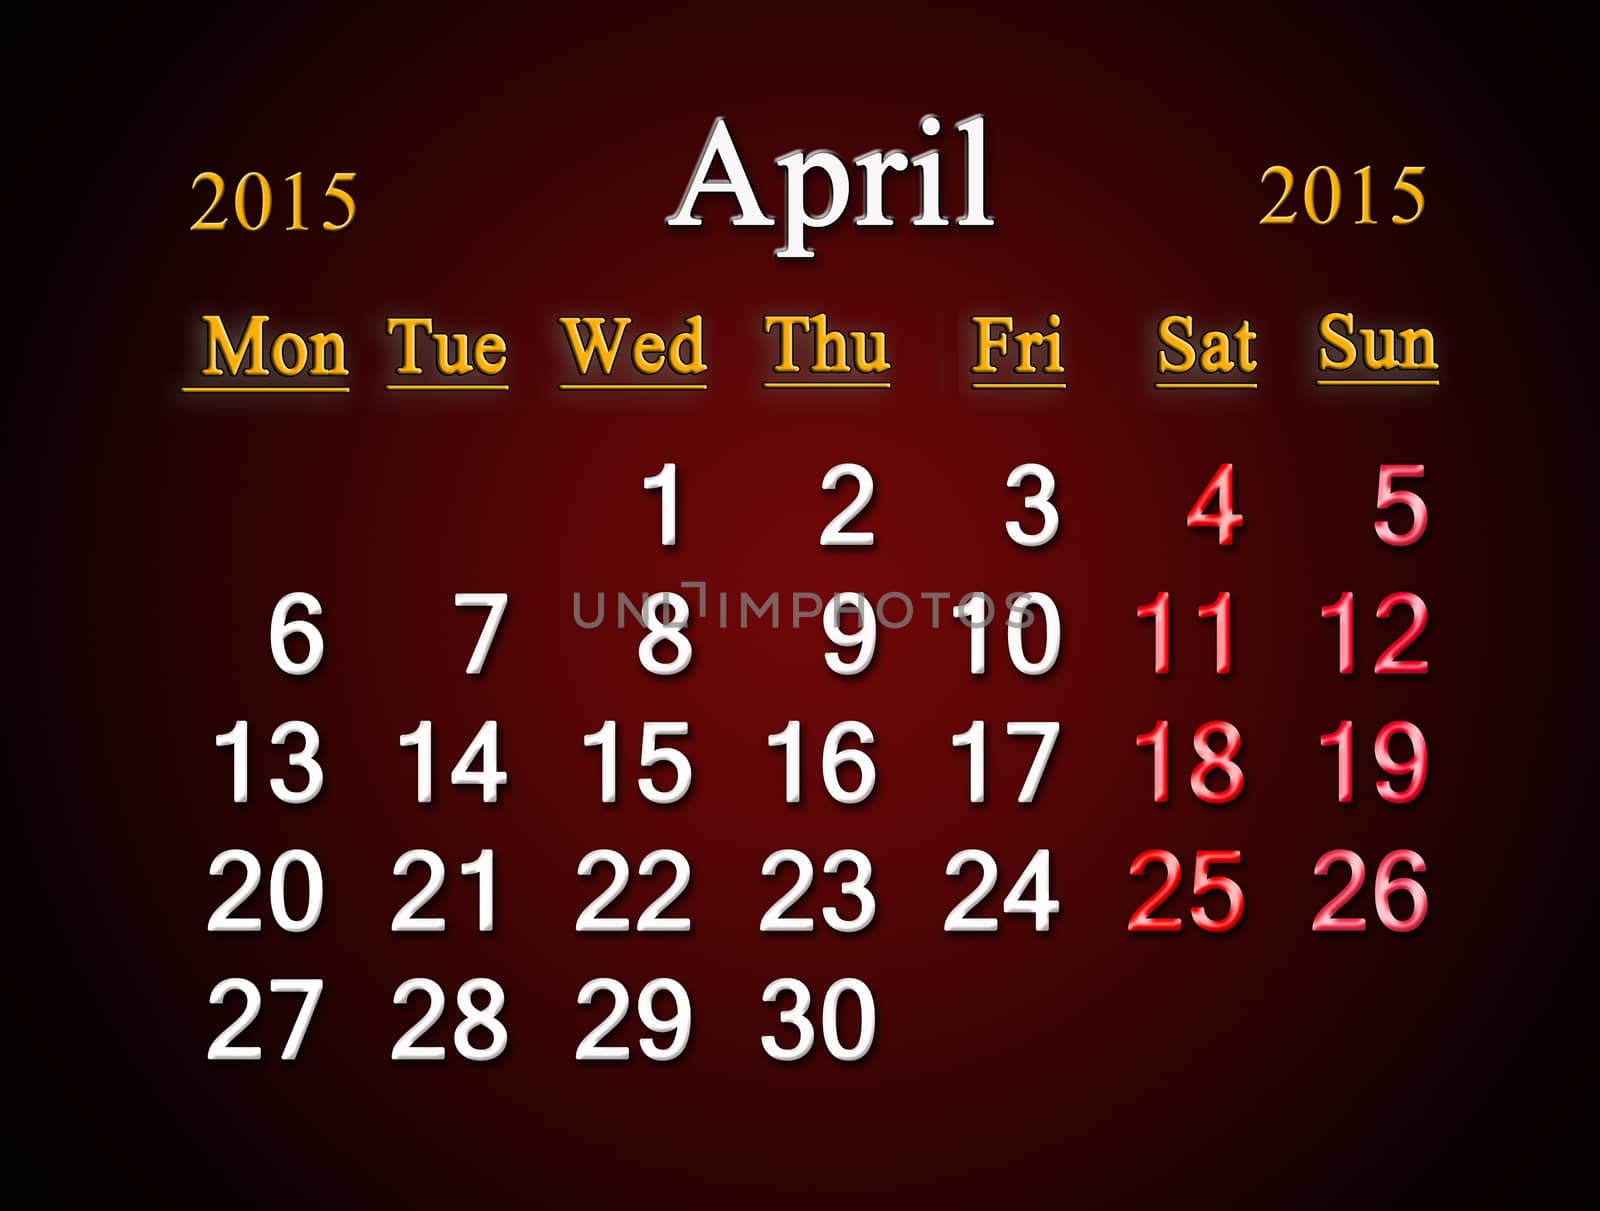 calendar on April of 2015 year on claret by alexmak